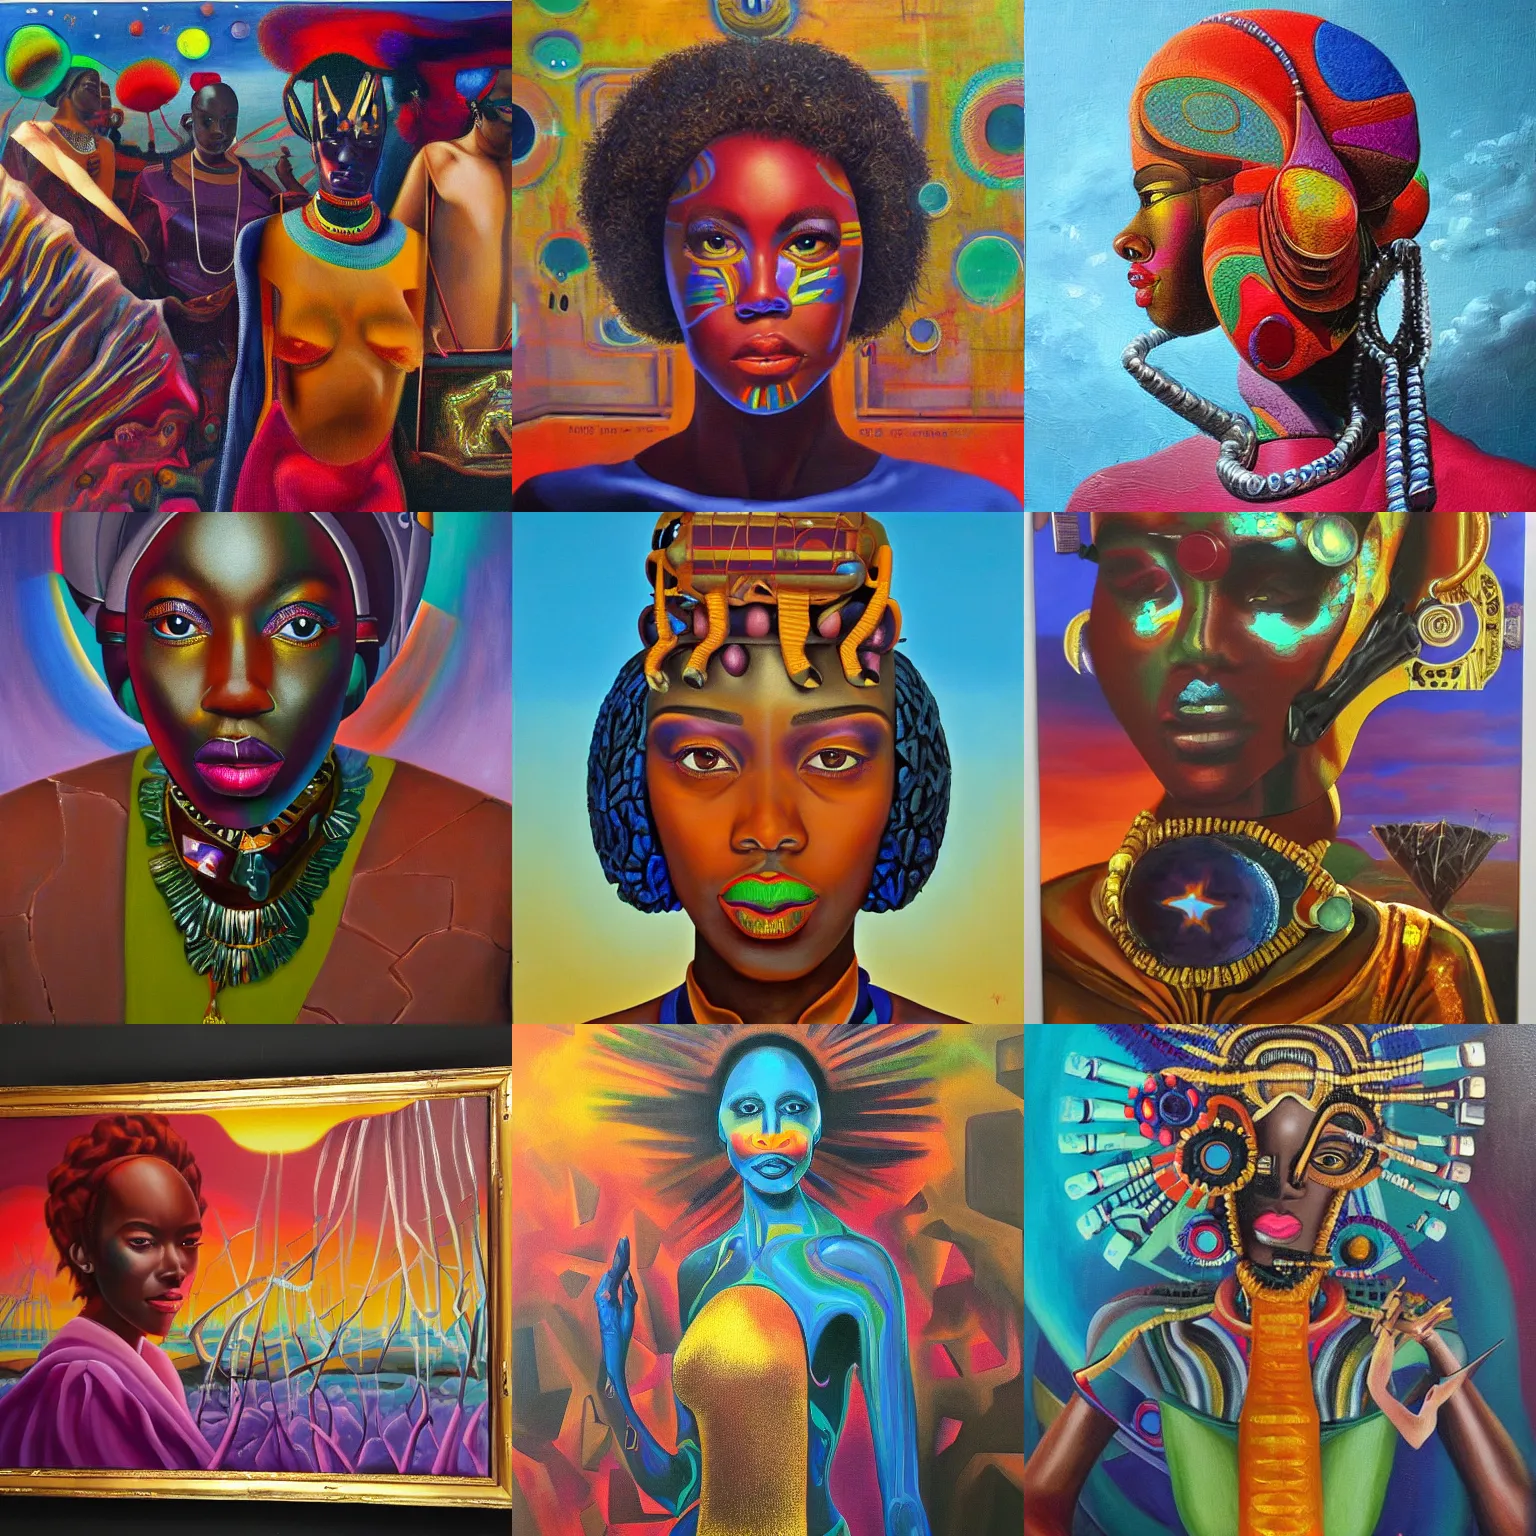 Image similar to If you really love me won't you tell me, then I won't have to be playing around, high quality oil painting afrofuturism, surrealism